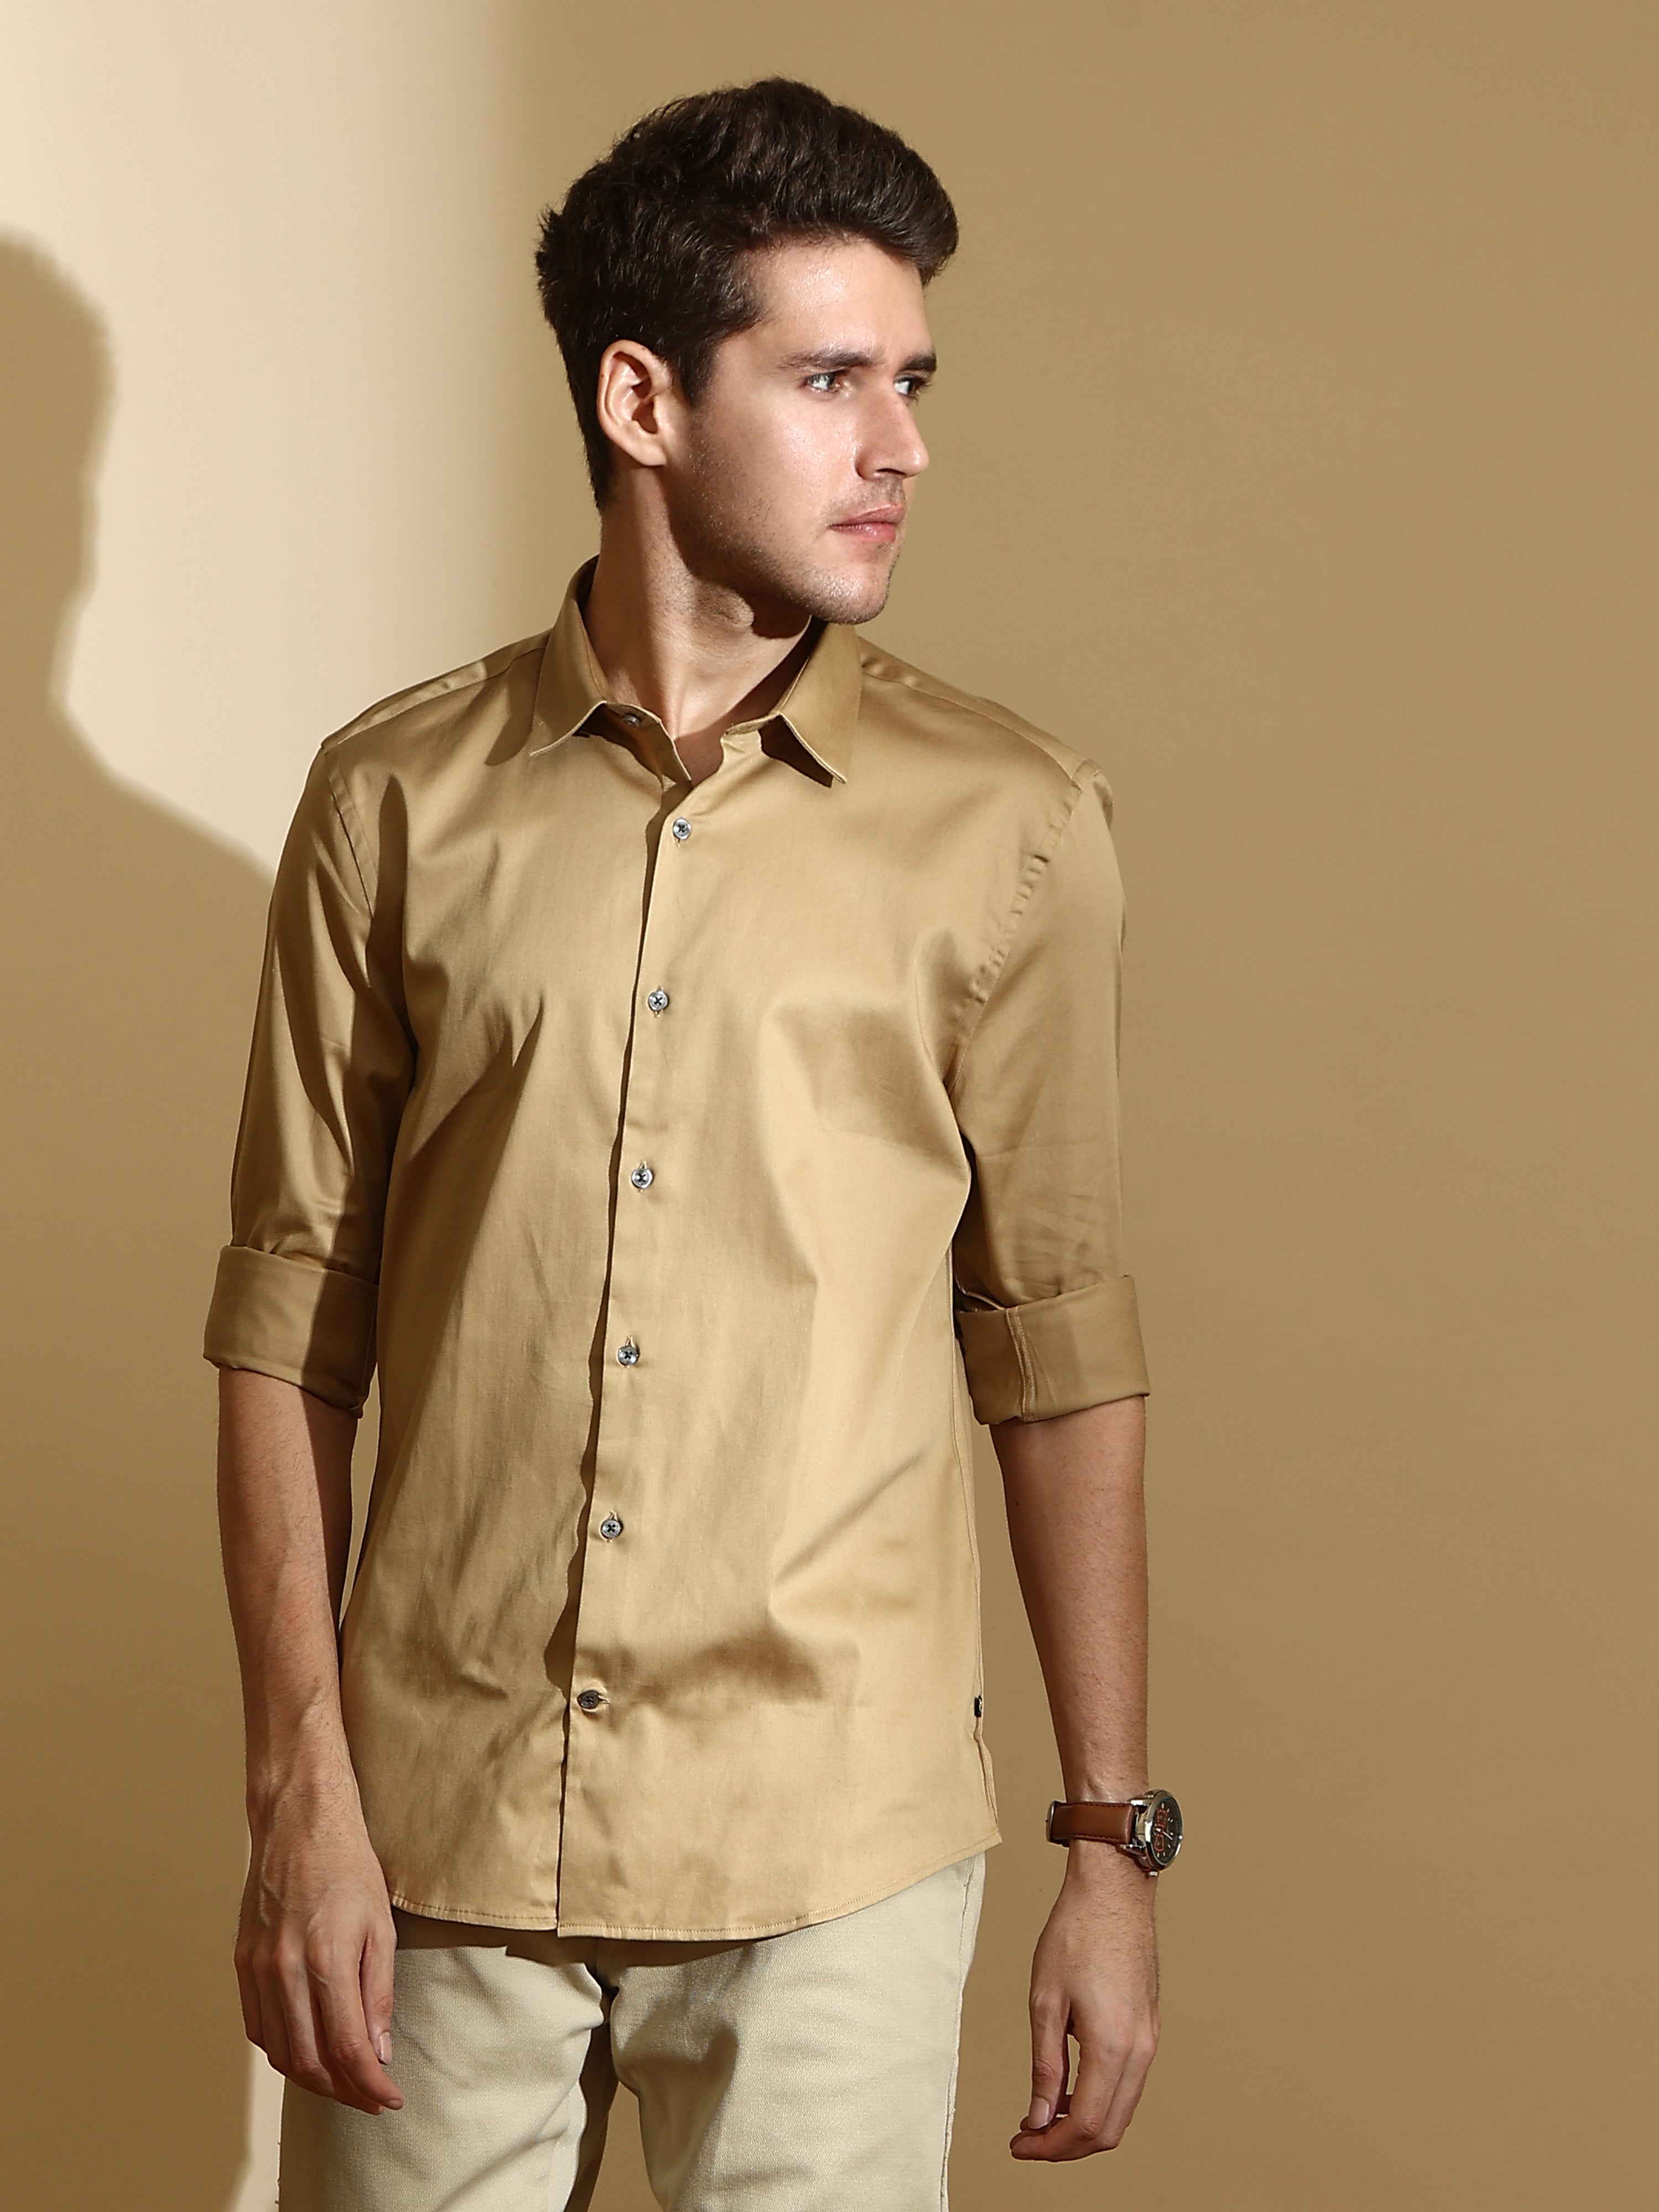 QUITE KHAKHI SEMI CASUAL SHIRT shop online at Estilocus. DETAILS & CARE This pure cotton Solid shirt is a stylish go-to for laidback days. Cut in a comfy regular fit, with a classic button-down front and chest pocket. 100% premium cotton full sleeve Solid